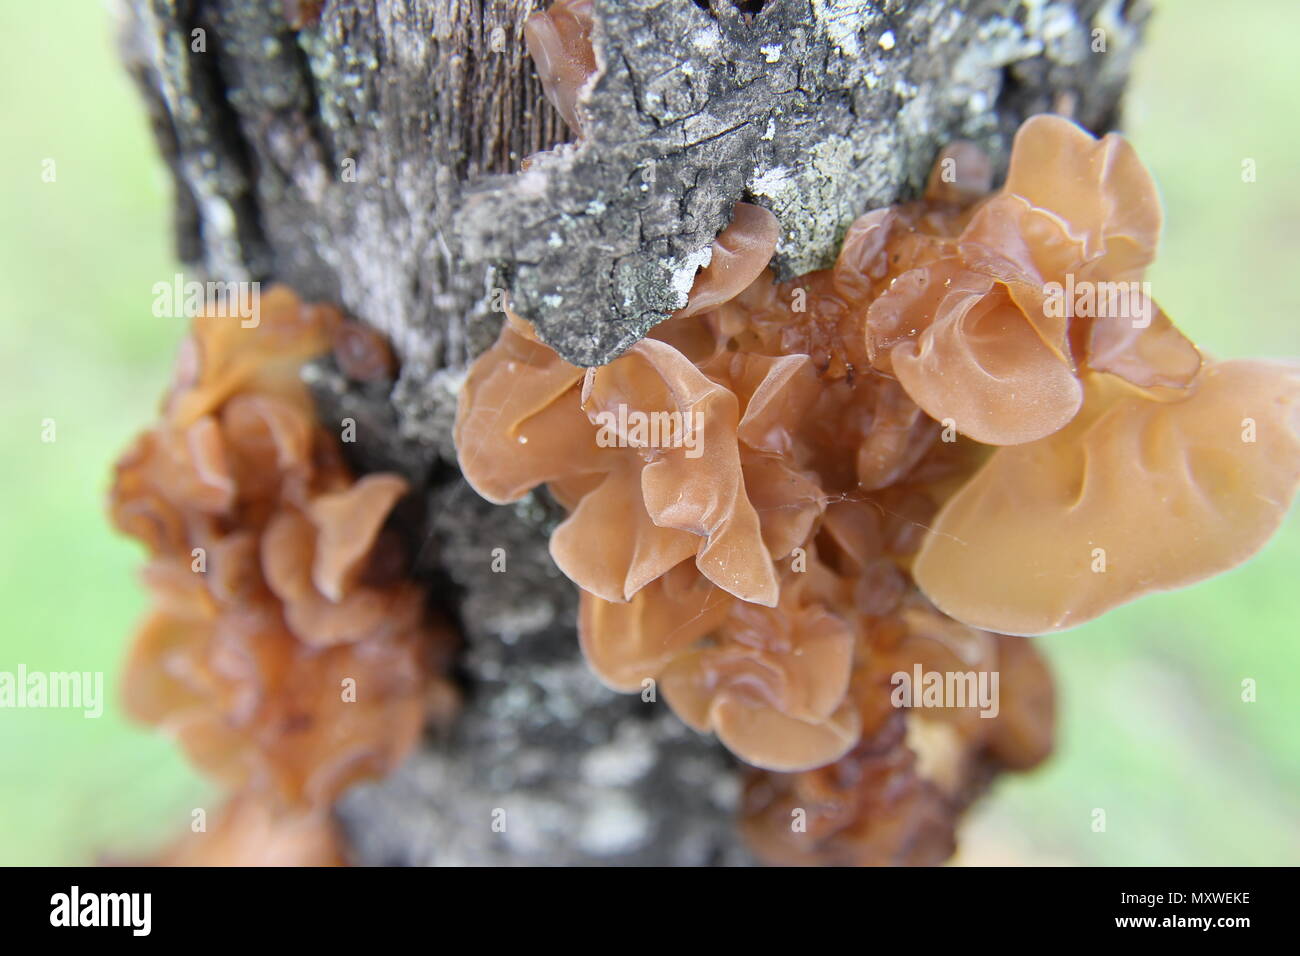 Ear mushrooms taking over the trunk of a tree. Stock Photo